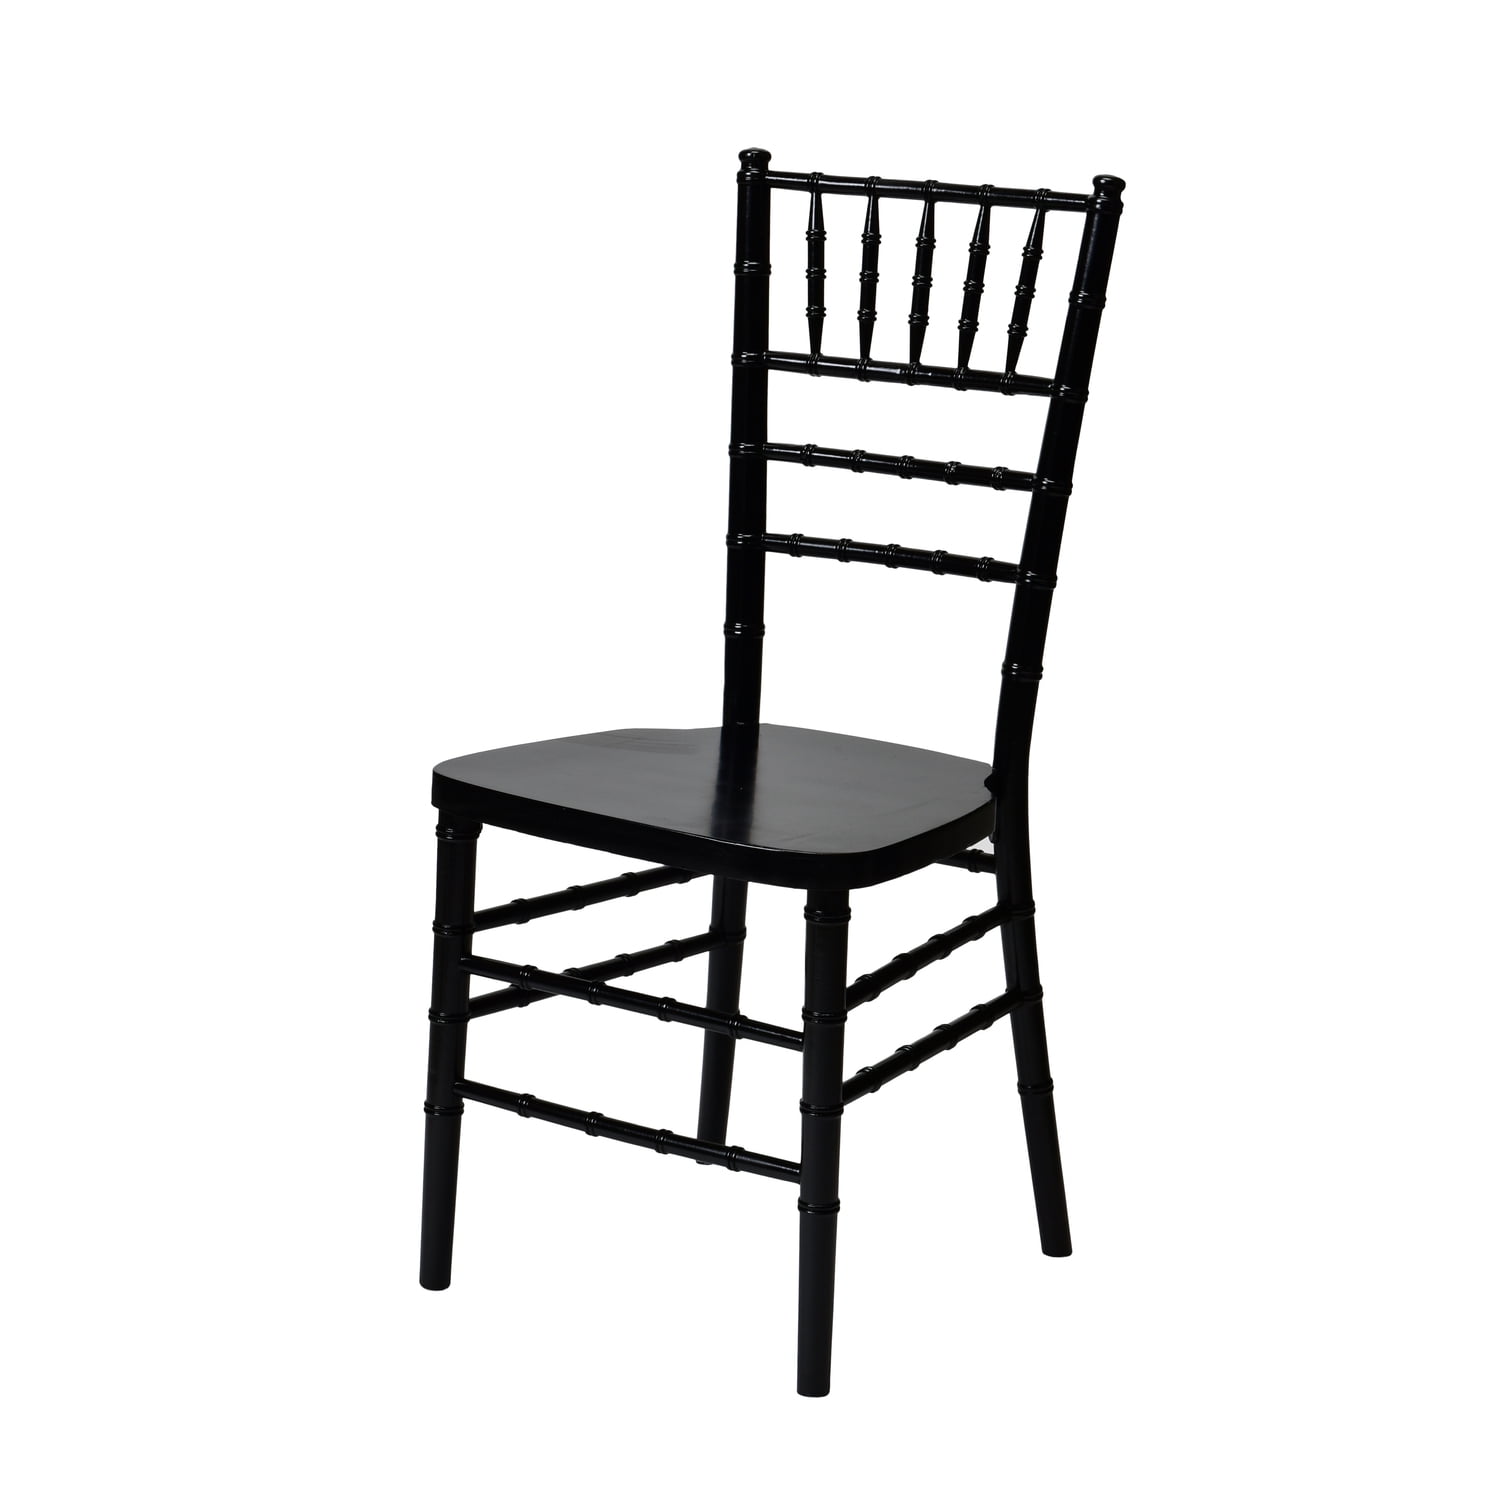 B-201-bk-web2 American Classic European Solid Black Wood Dining Chair, Set Of 2 - 36 X 16 X 15 In.